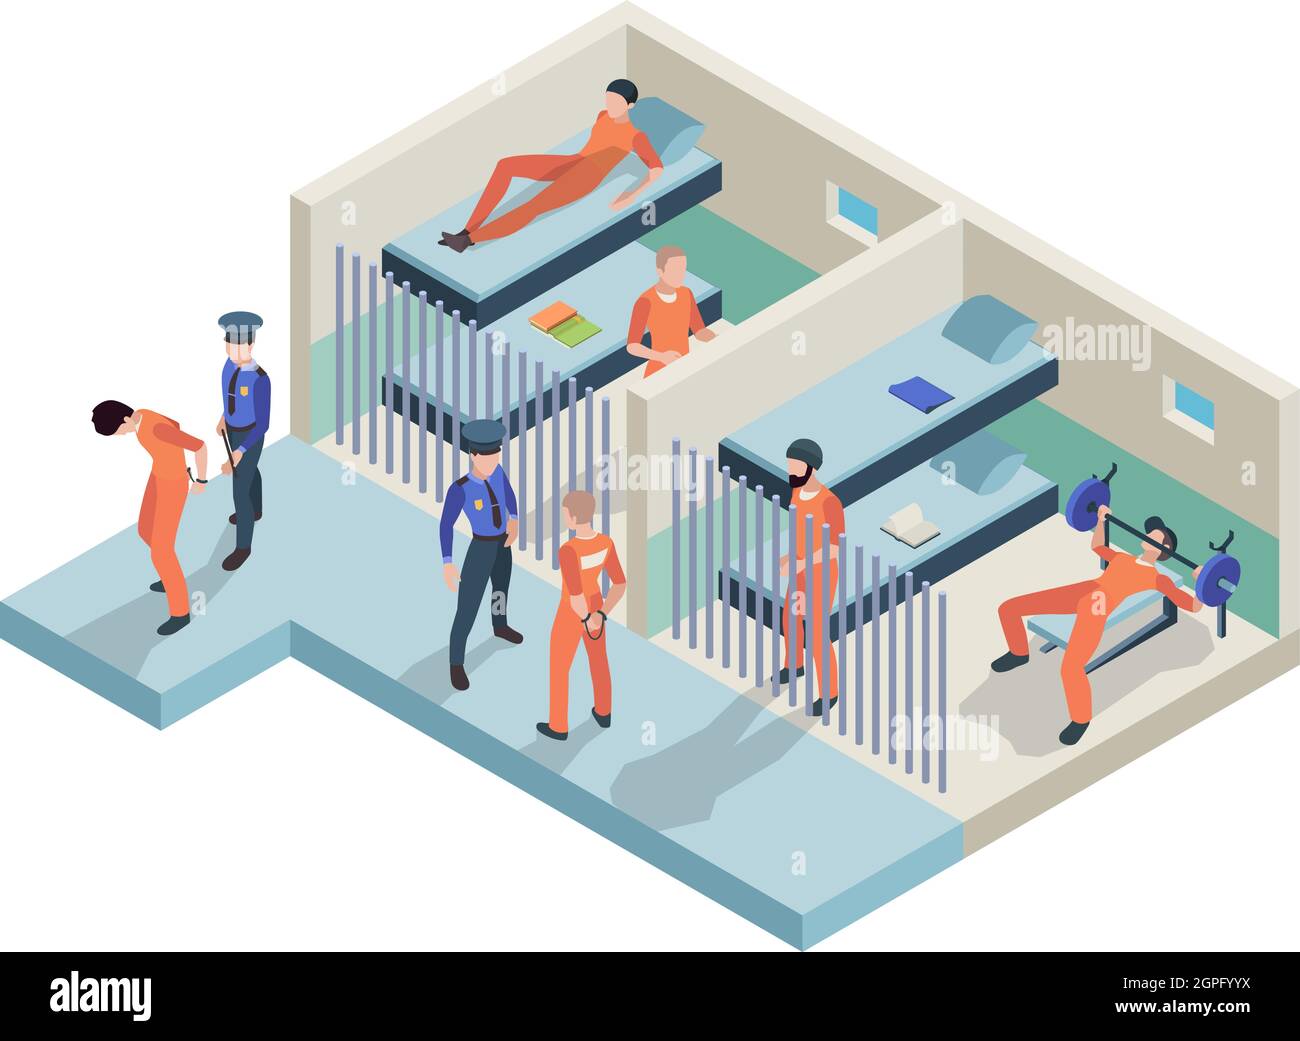 Jail interior. Prisoners sitting in cameras walking police guards in jail rooms inmate persons vector isometric Stock Vector